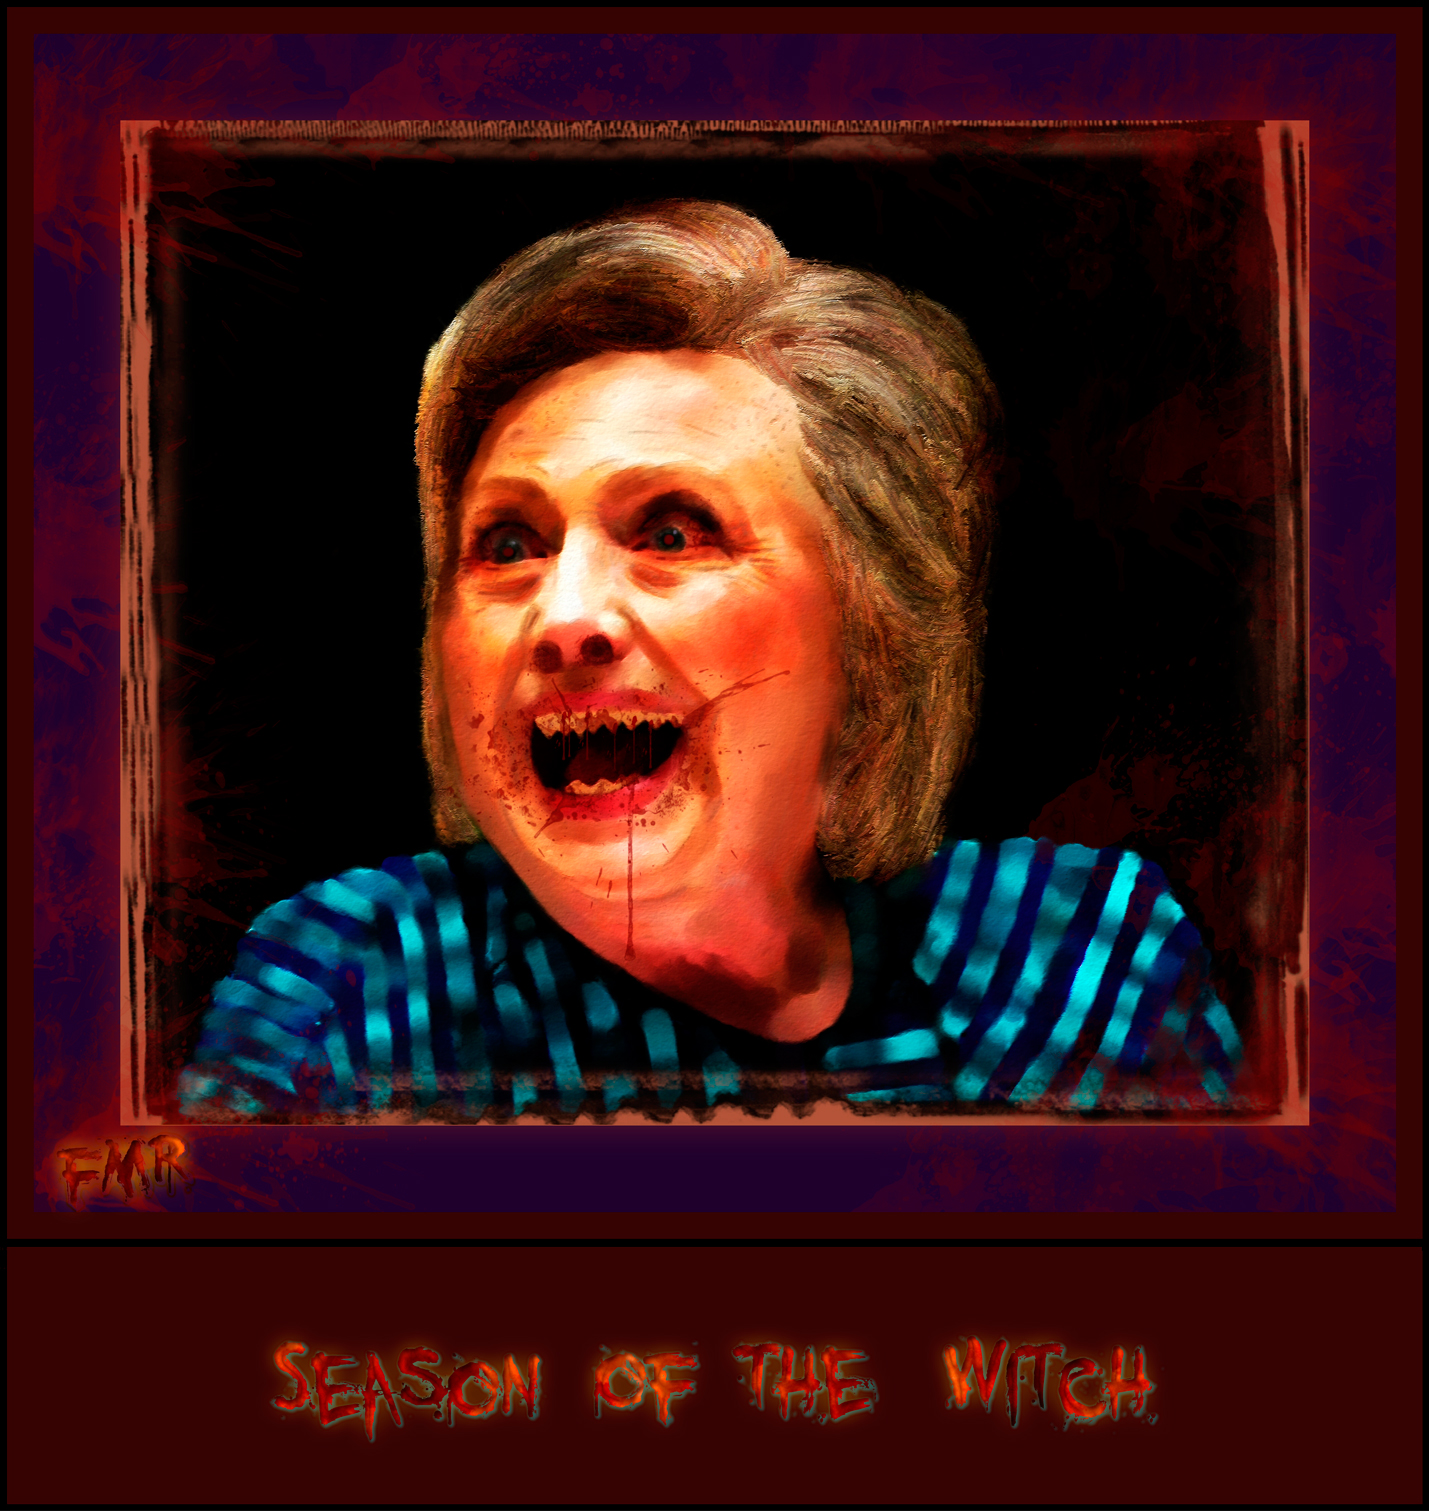 Season of the Witch by Saltwater